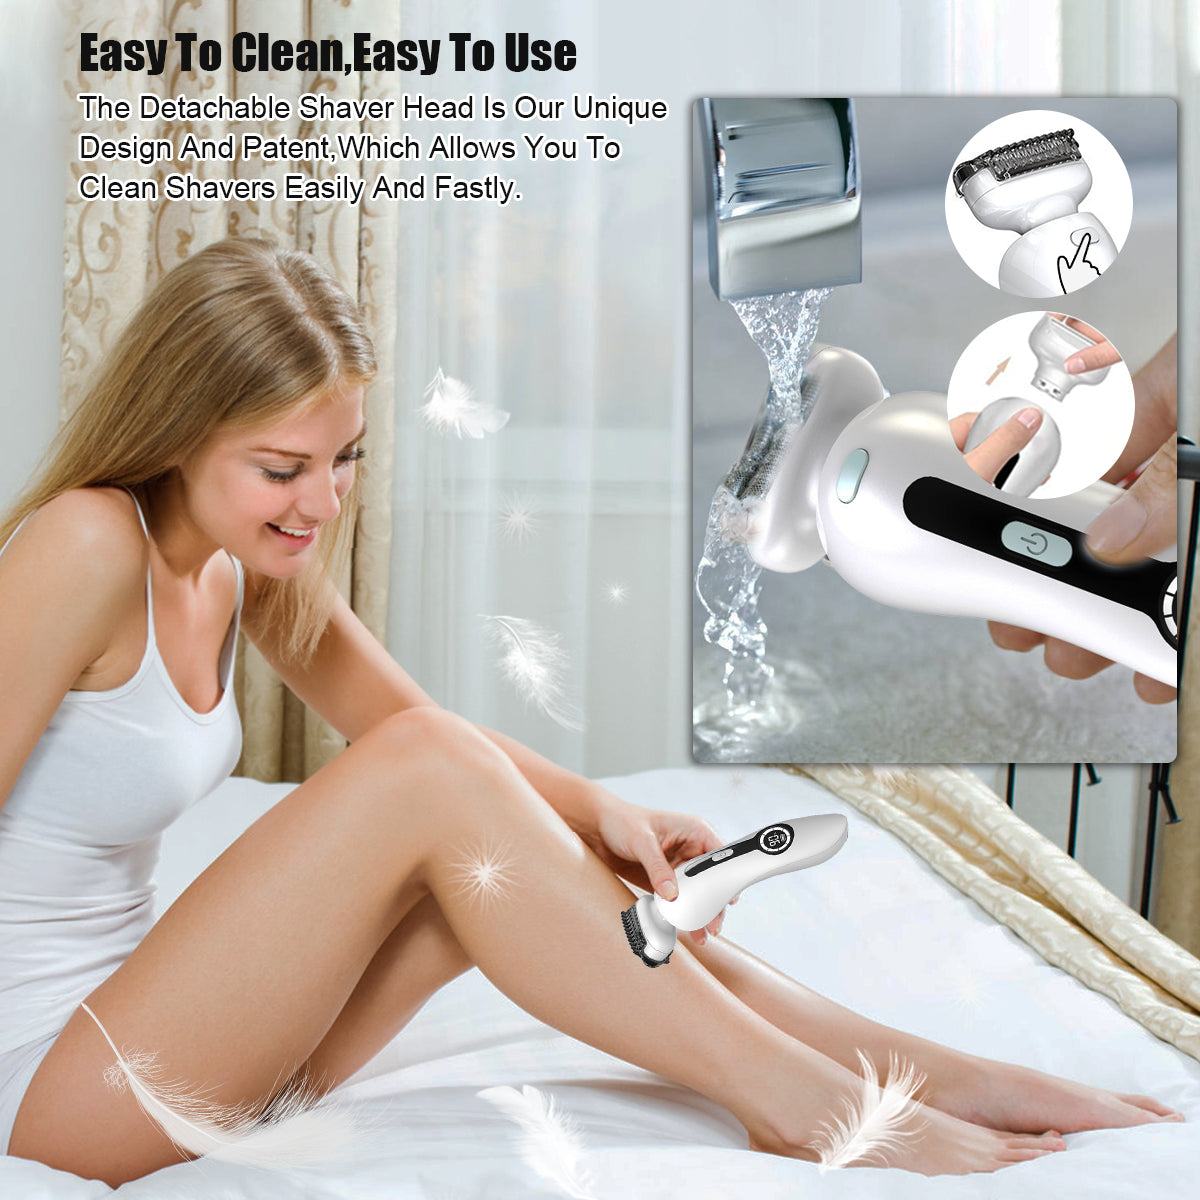 HANNEA  Trimmer for Women Shaving Machine IP7 with LCD Display Facial Razors Bikini Trimmer for Women with LED Light Cordless Hair Removal Electric Razor USB Charge Wet & Dry Use Safe Shaver for Legs Underarm